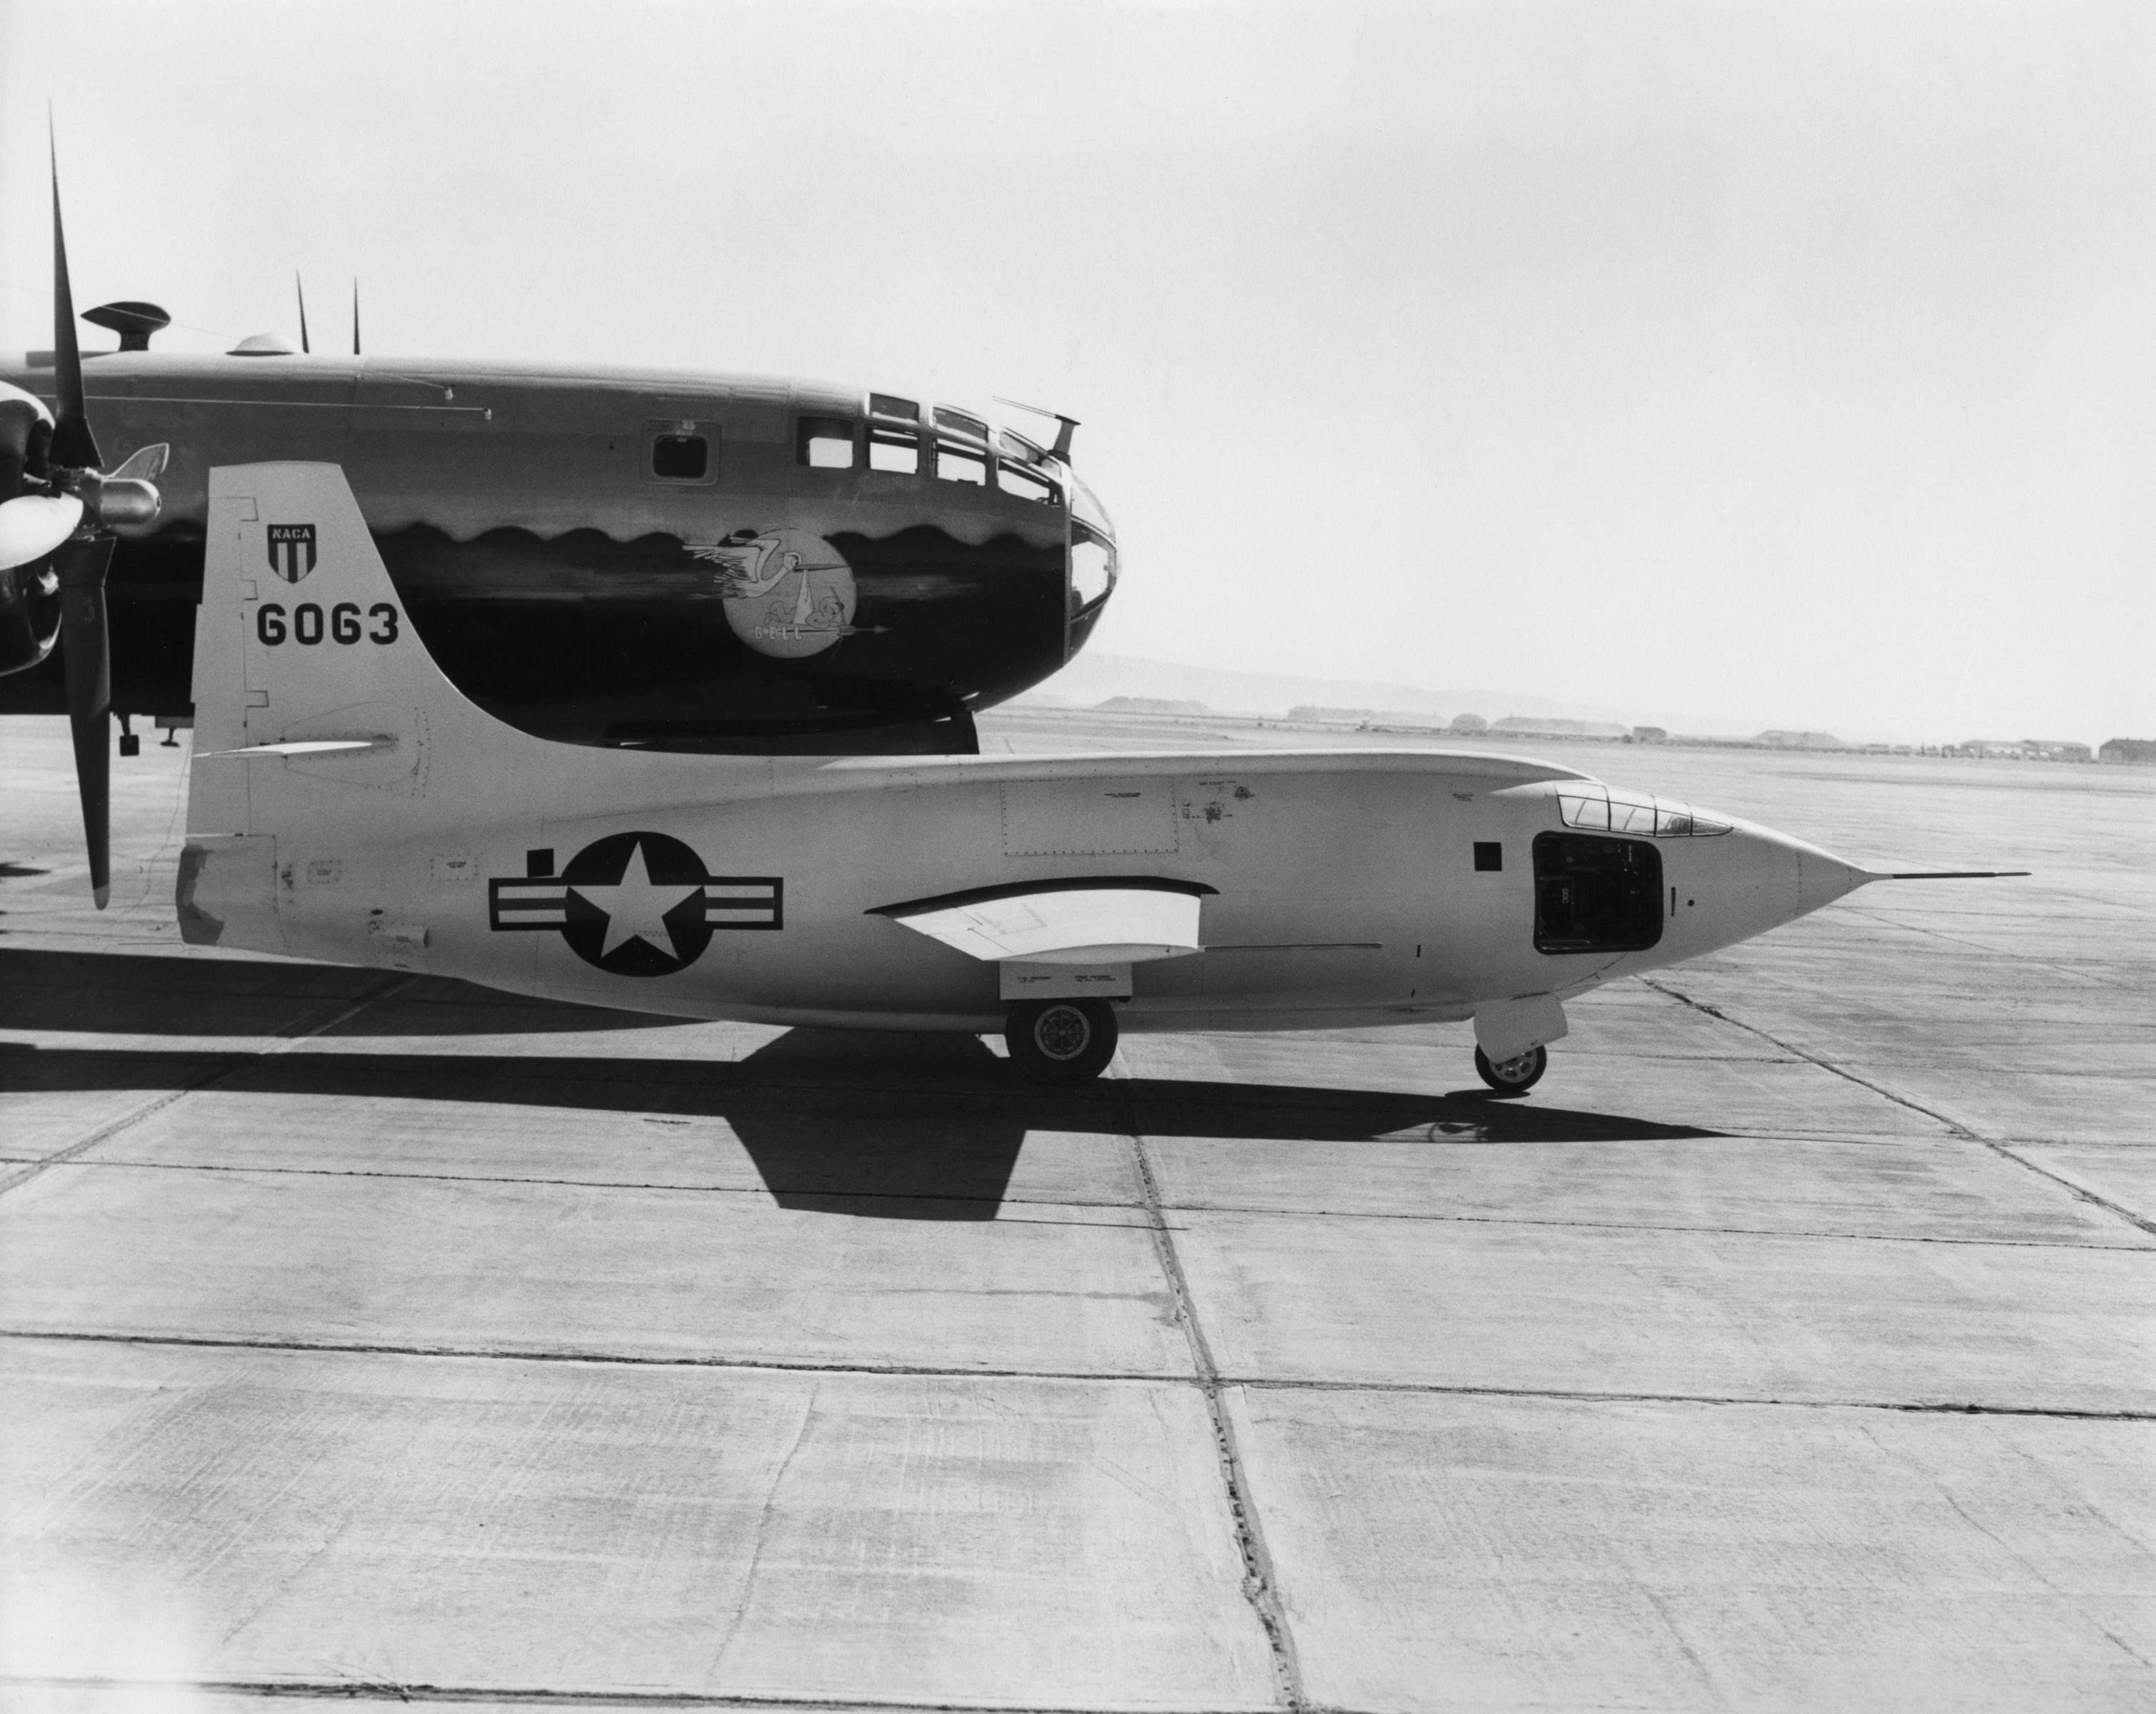 Nice Images Collection: Bell X-1 Desktop Wallpapers